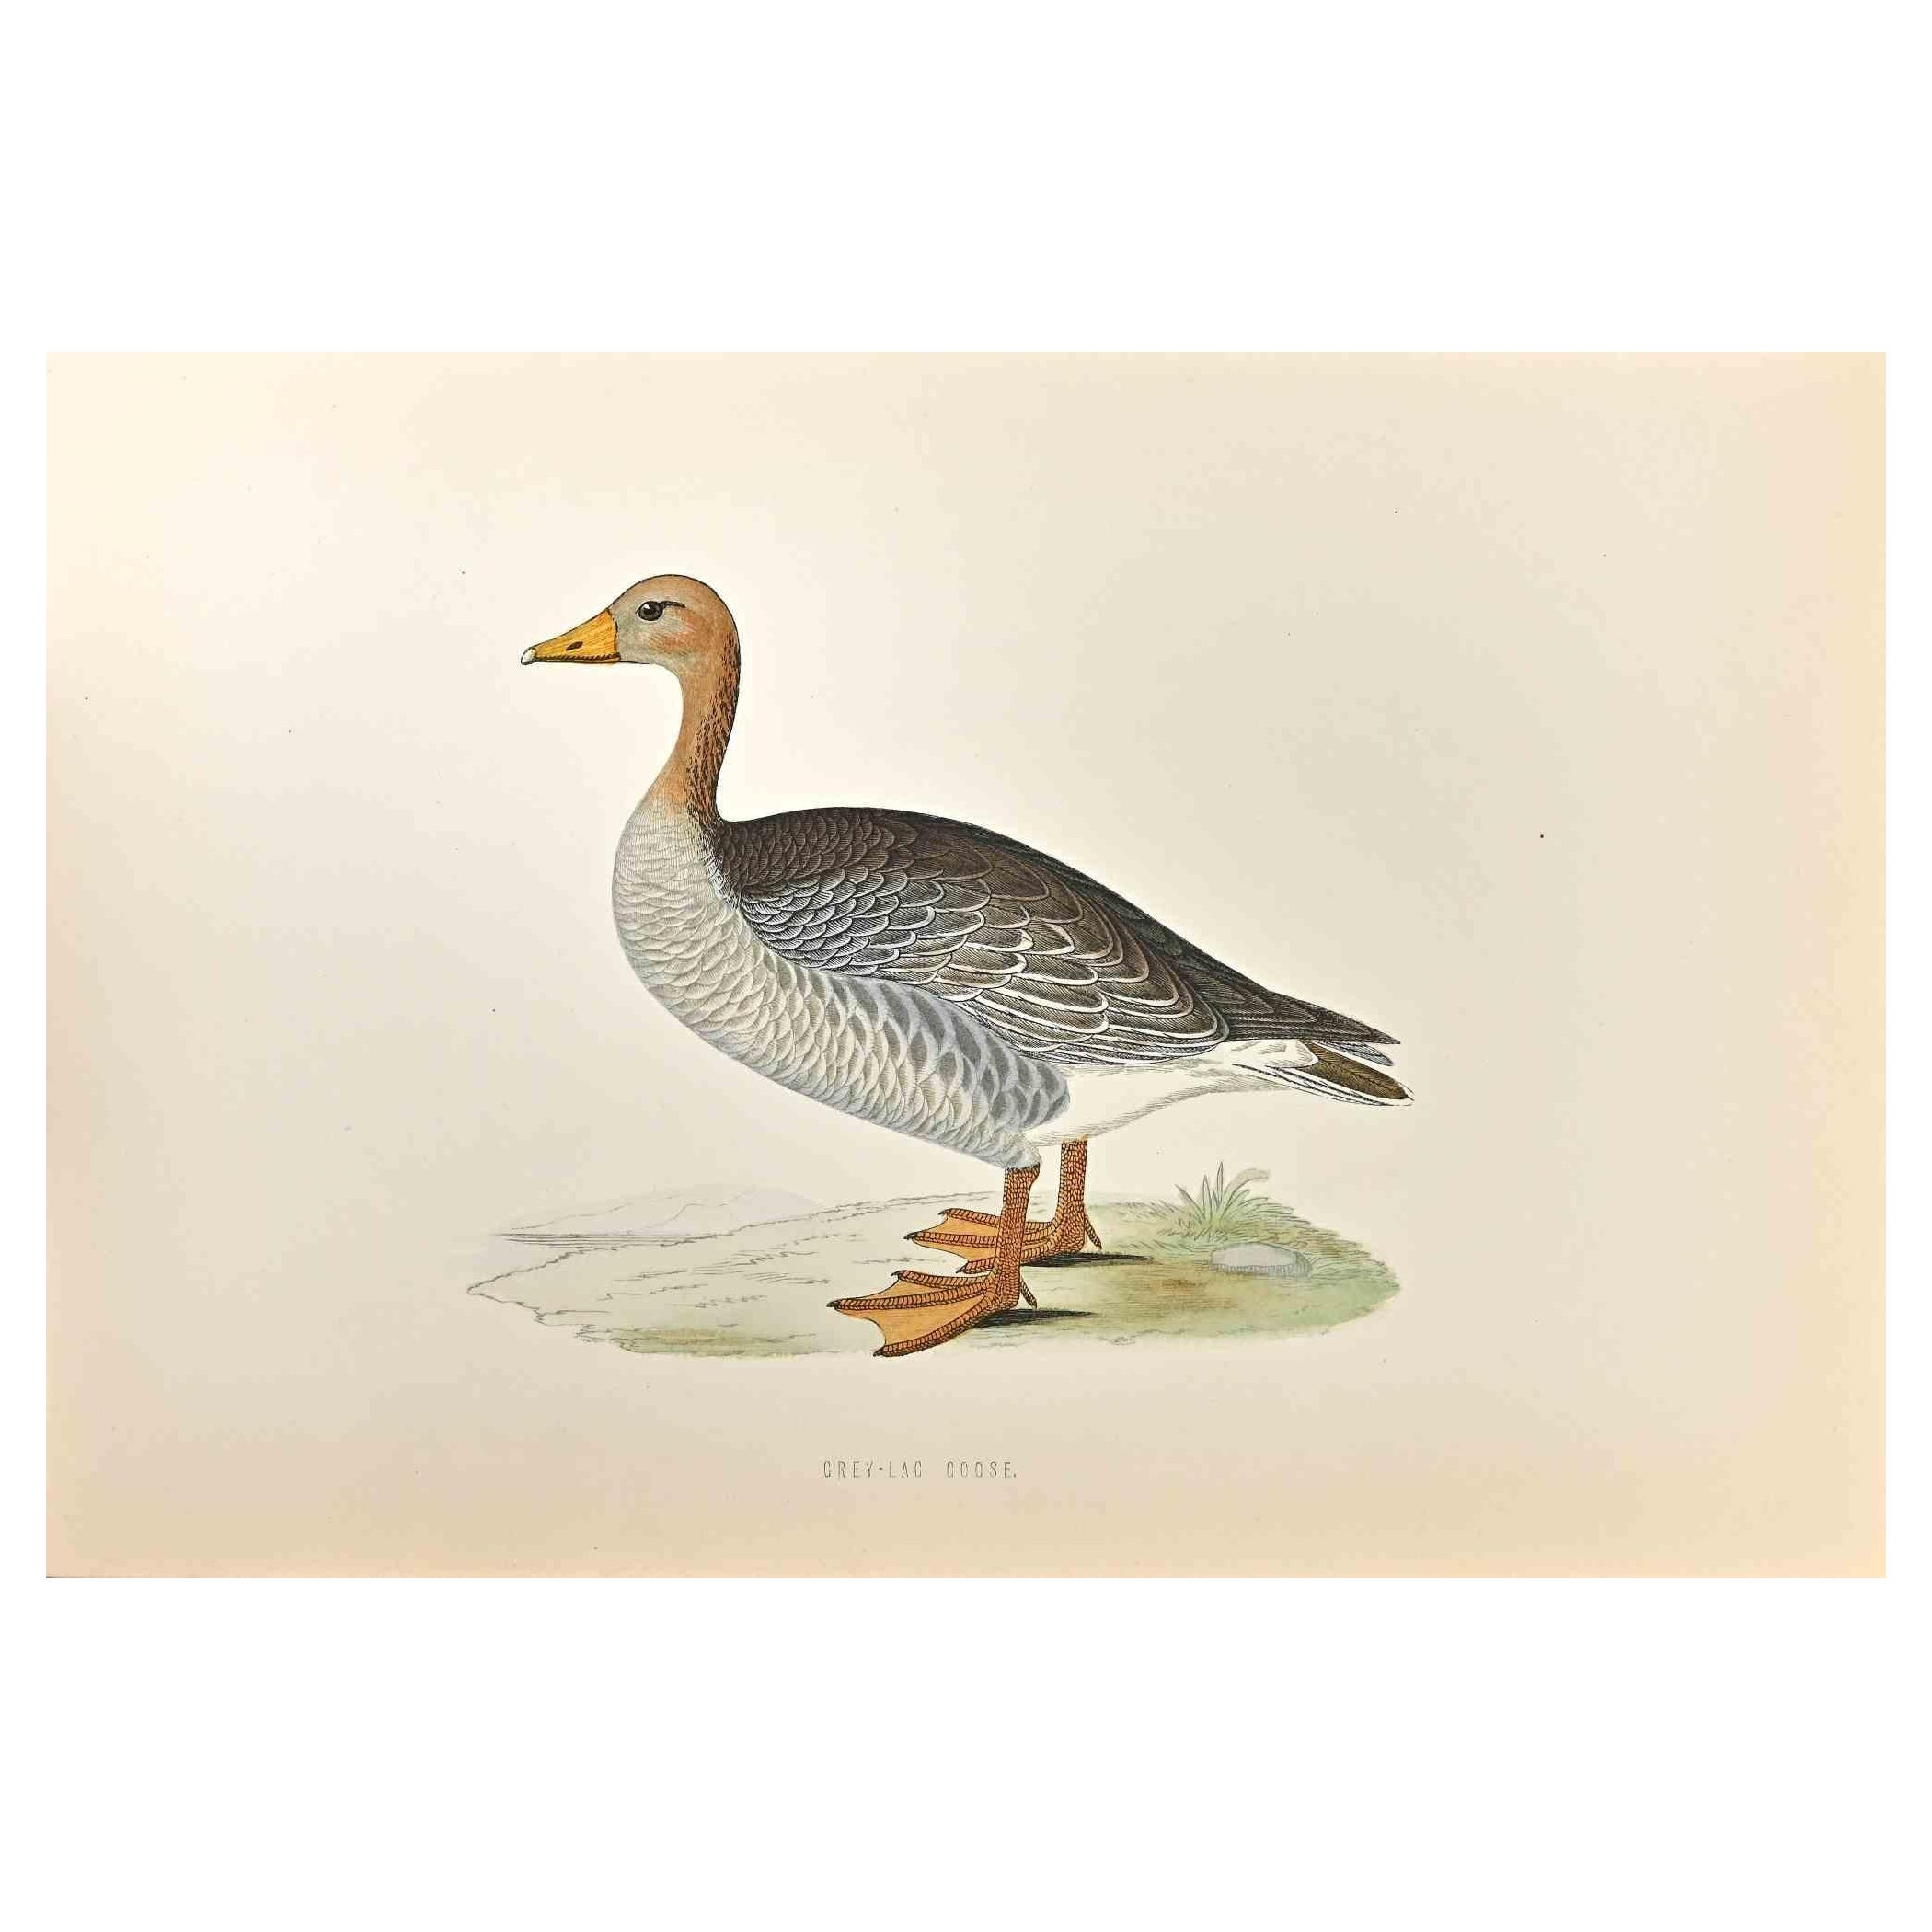 Grey-Lag Goose is a modern artwork realized in 1870 by the British artist Alexander Francis Lydon (1836-1917). 

Woodcut print on ivory-colored paper.

Hand-colored, published by London, Bell & Sons, 1870.  

The name of the bird is printed on the